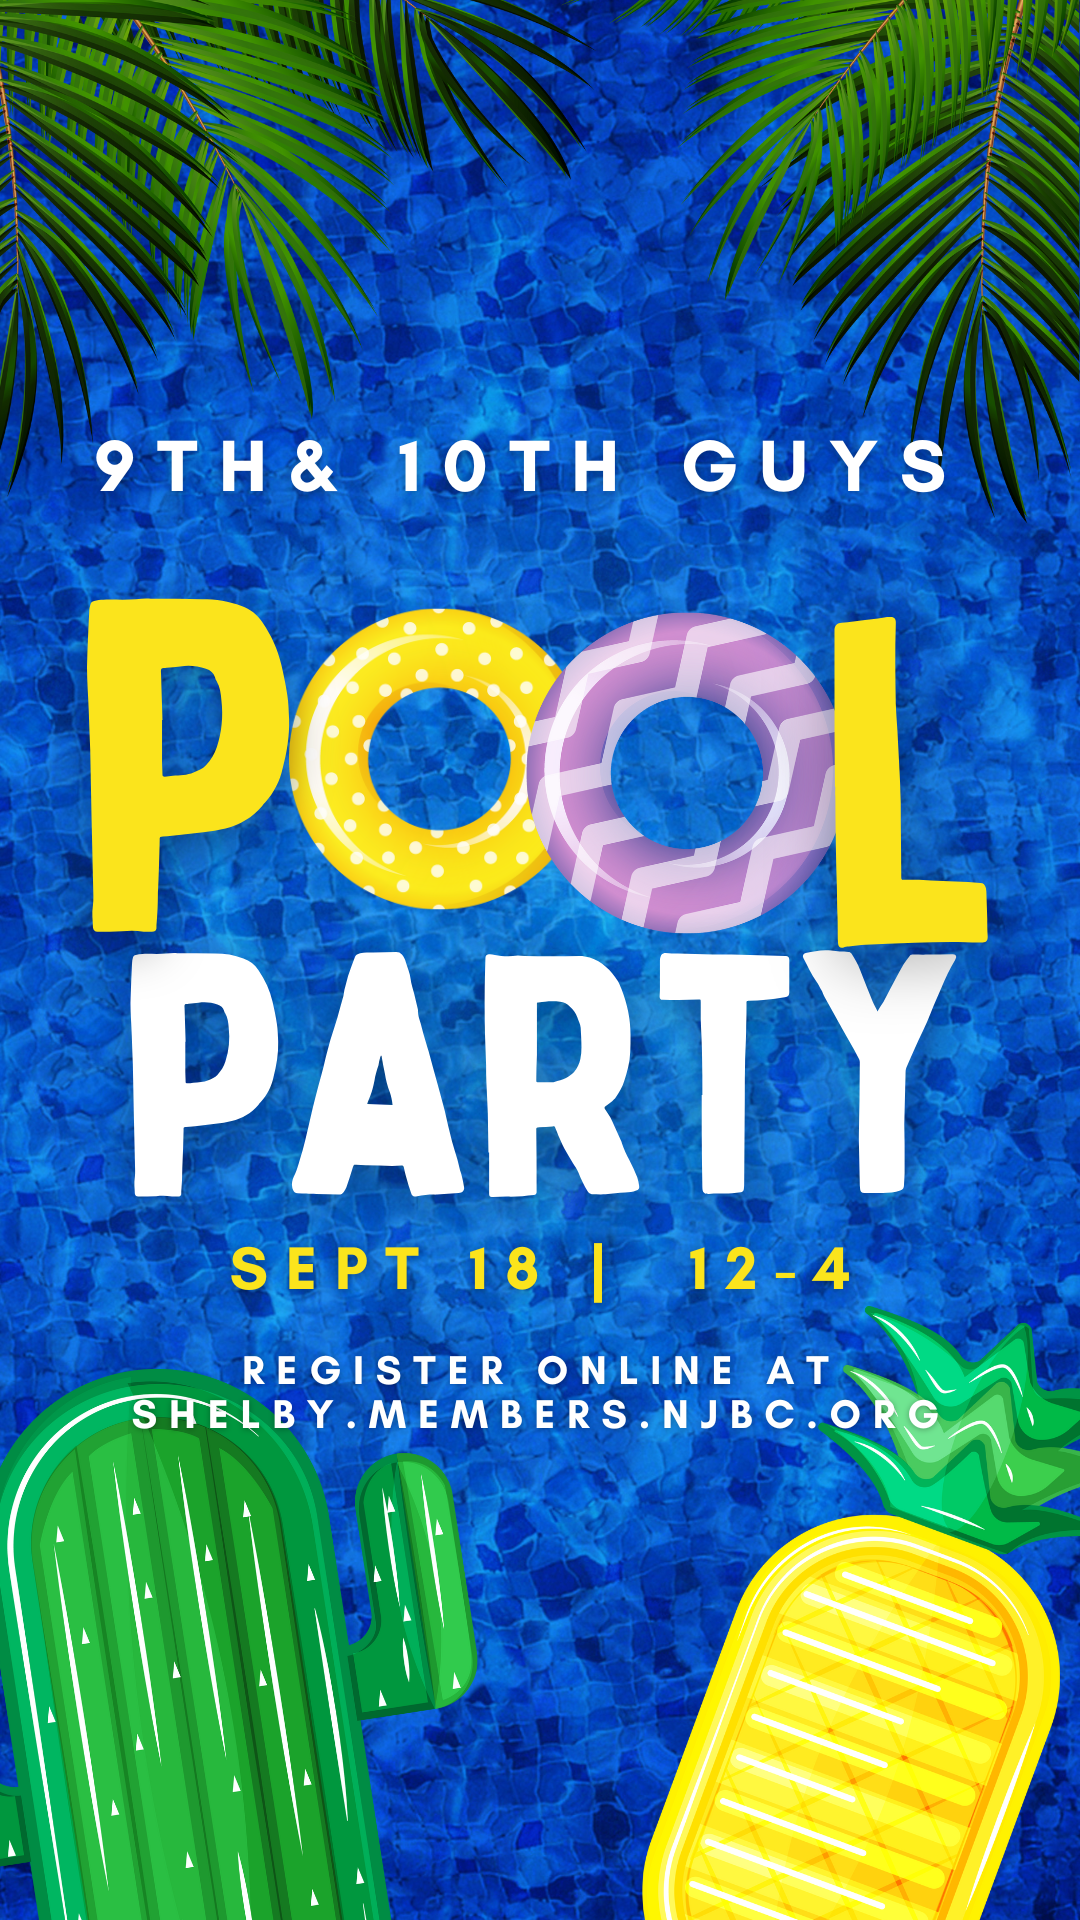 9th & 10th Guys Pool Party Sept 18 